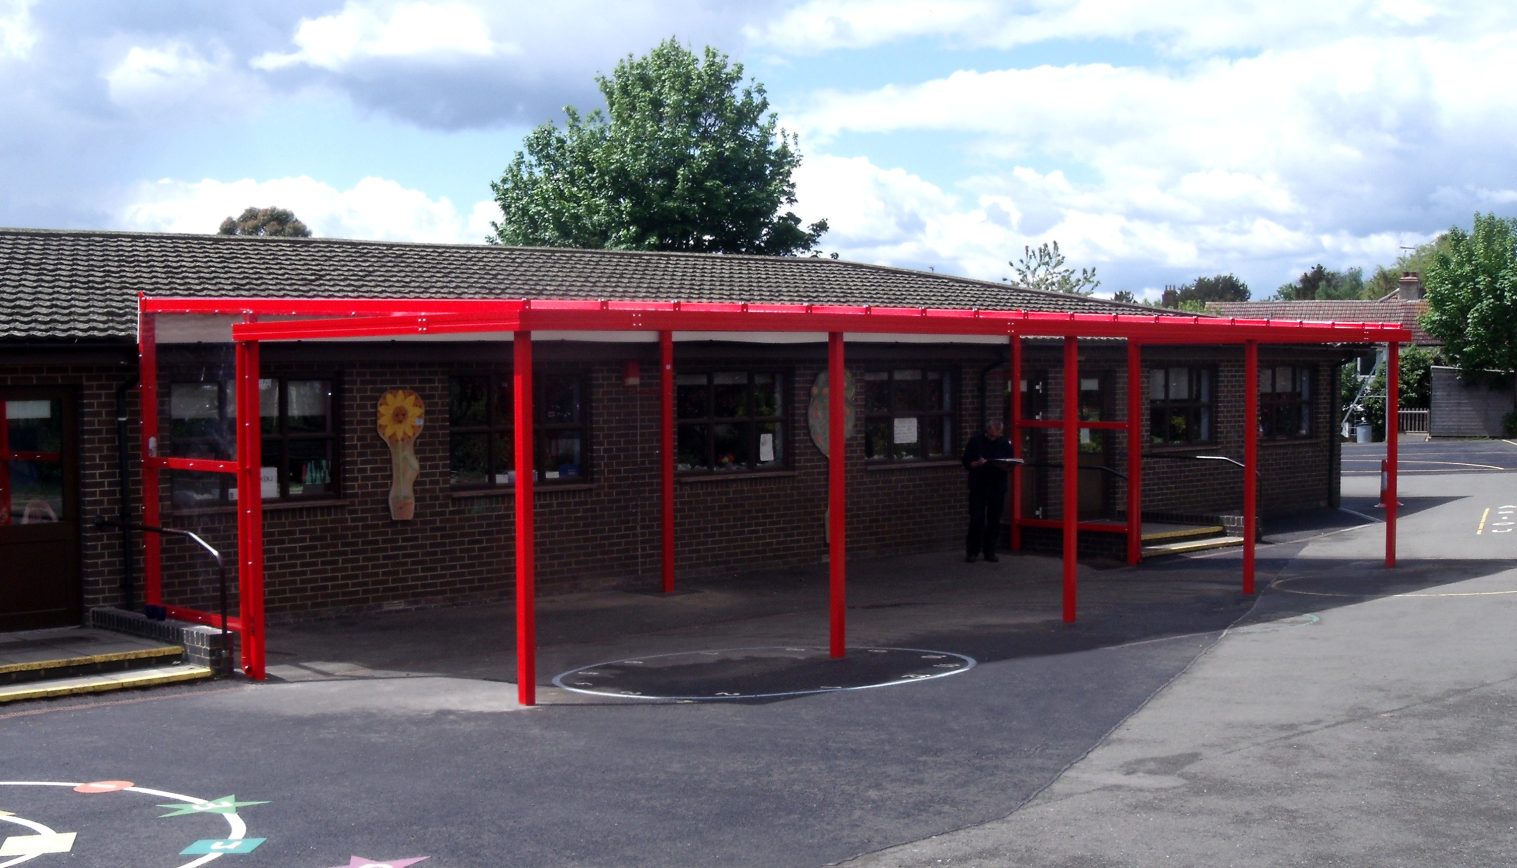 Wootton Primary School – Wall Mounted Canopy